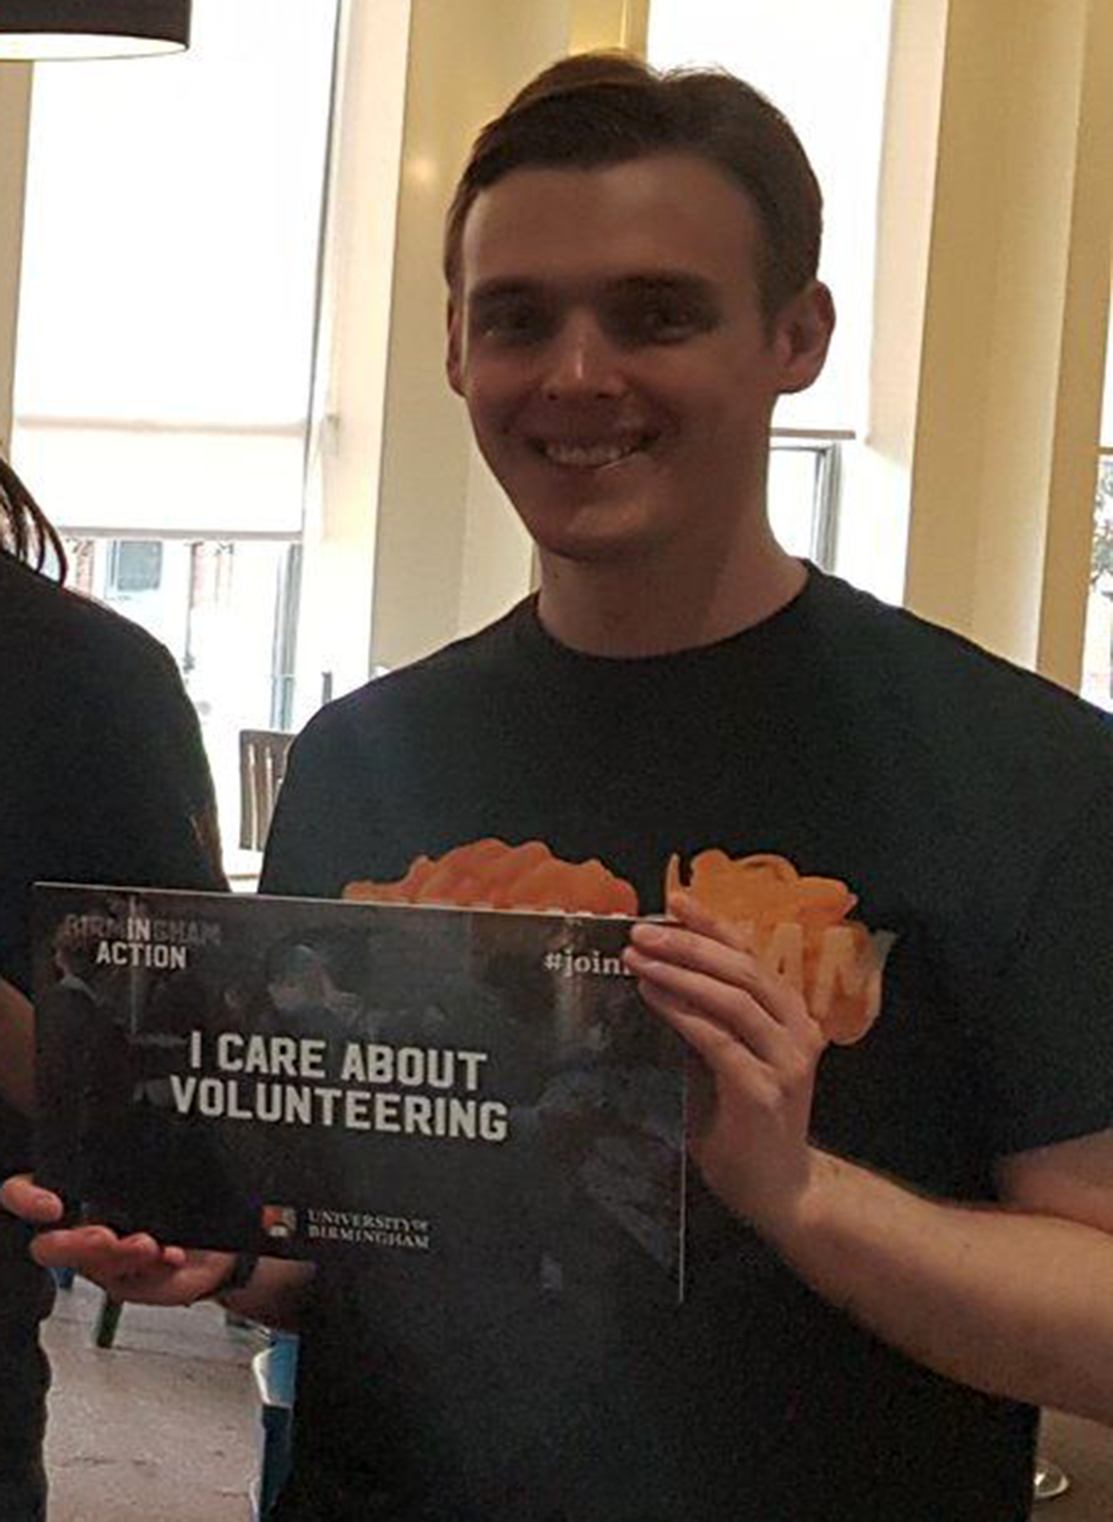 Male wearing black and orange t-shirt and holding a board that says ' I care about volunteering'